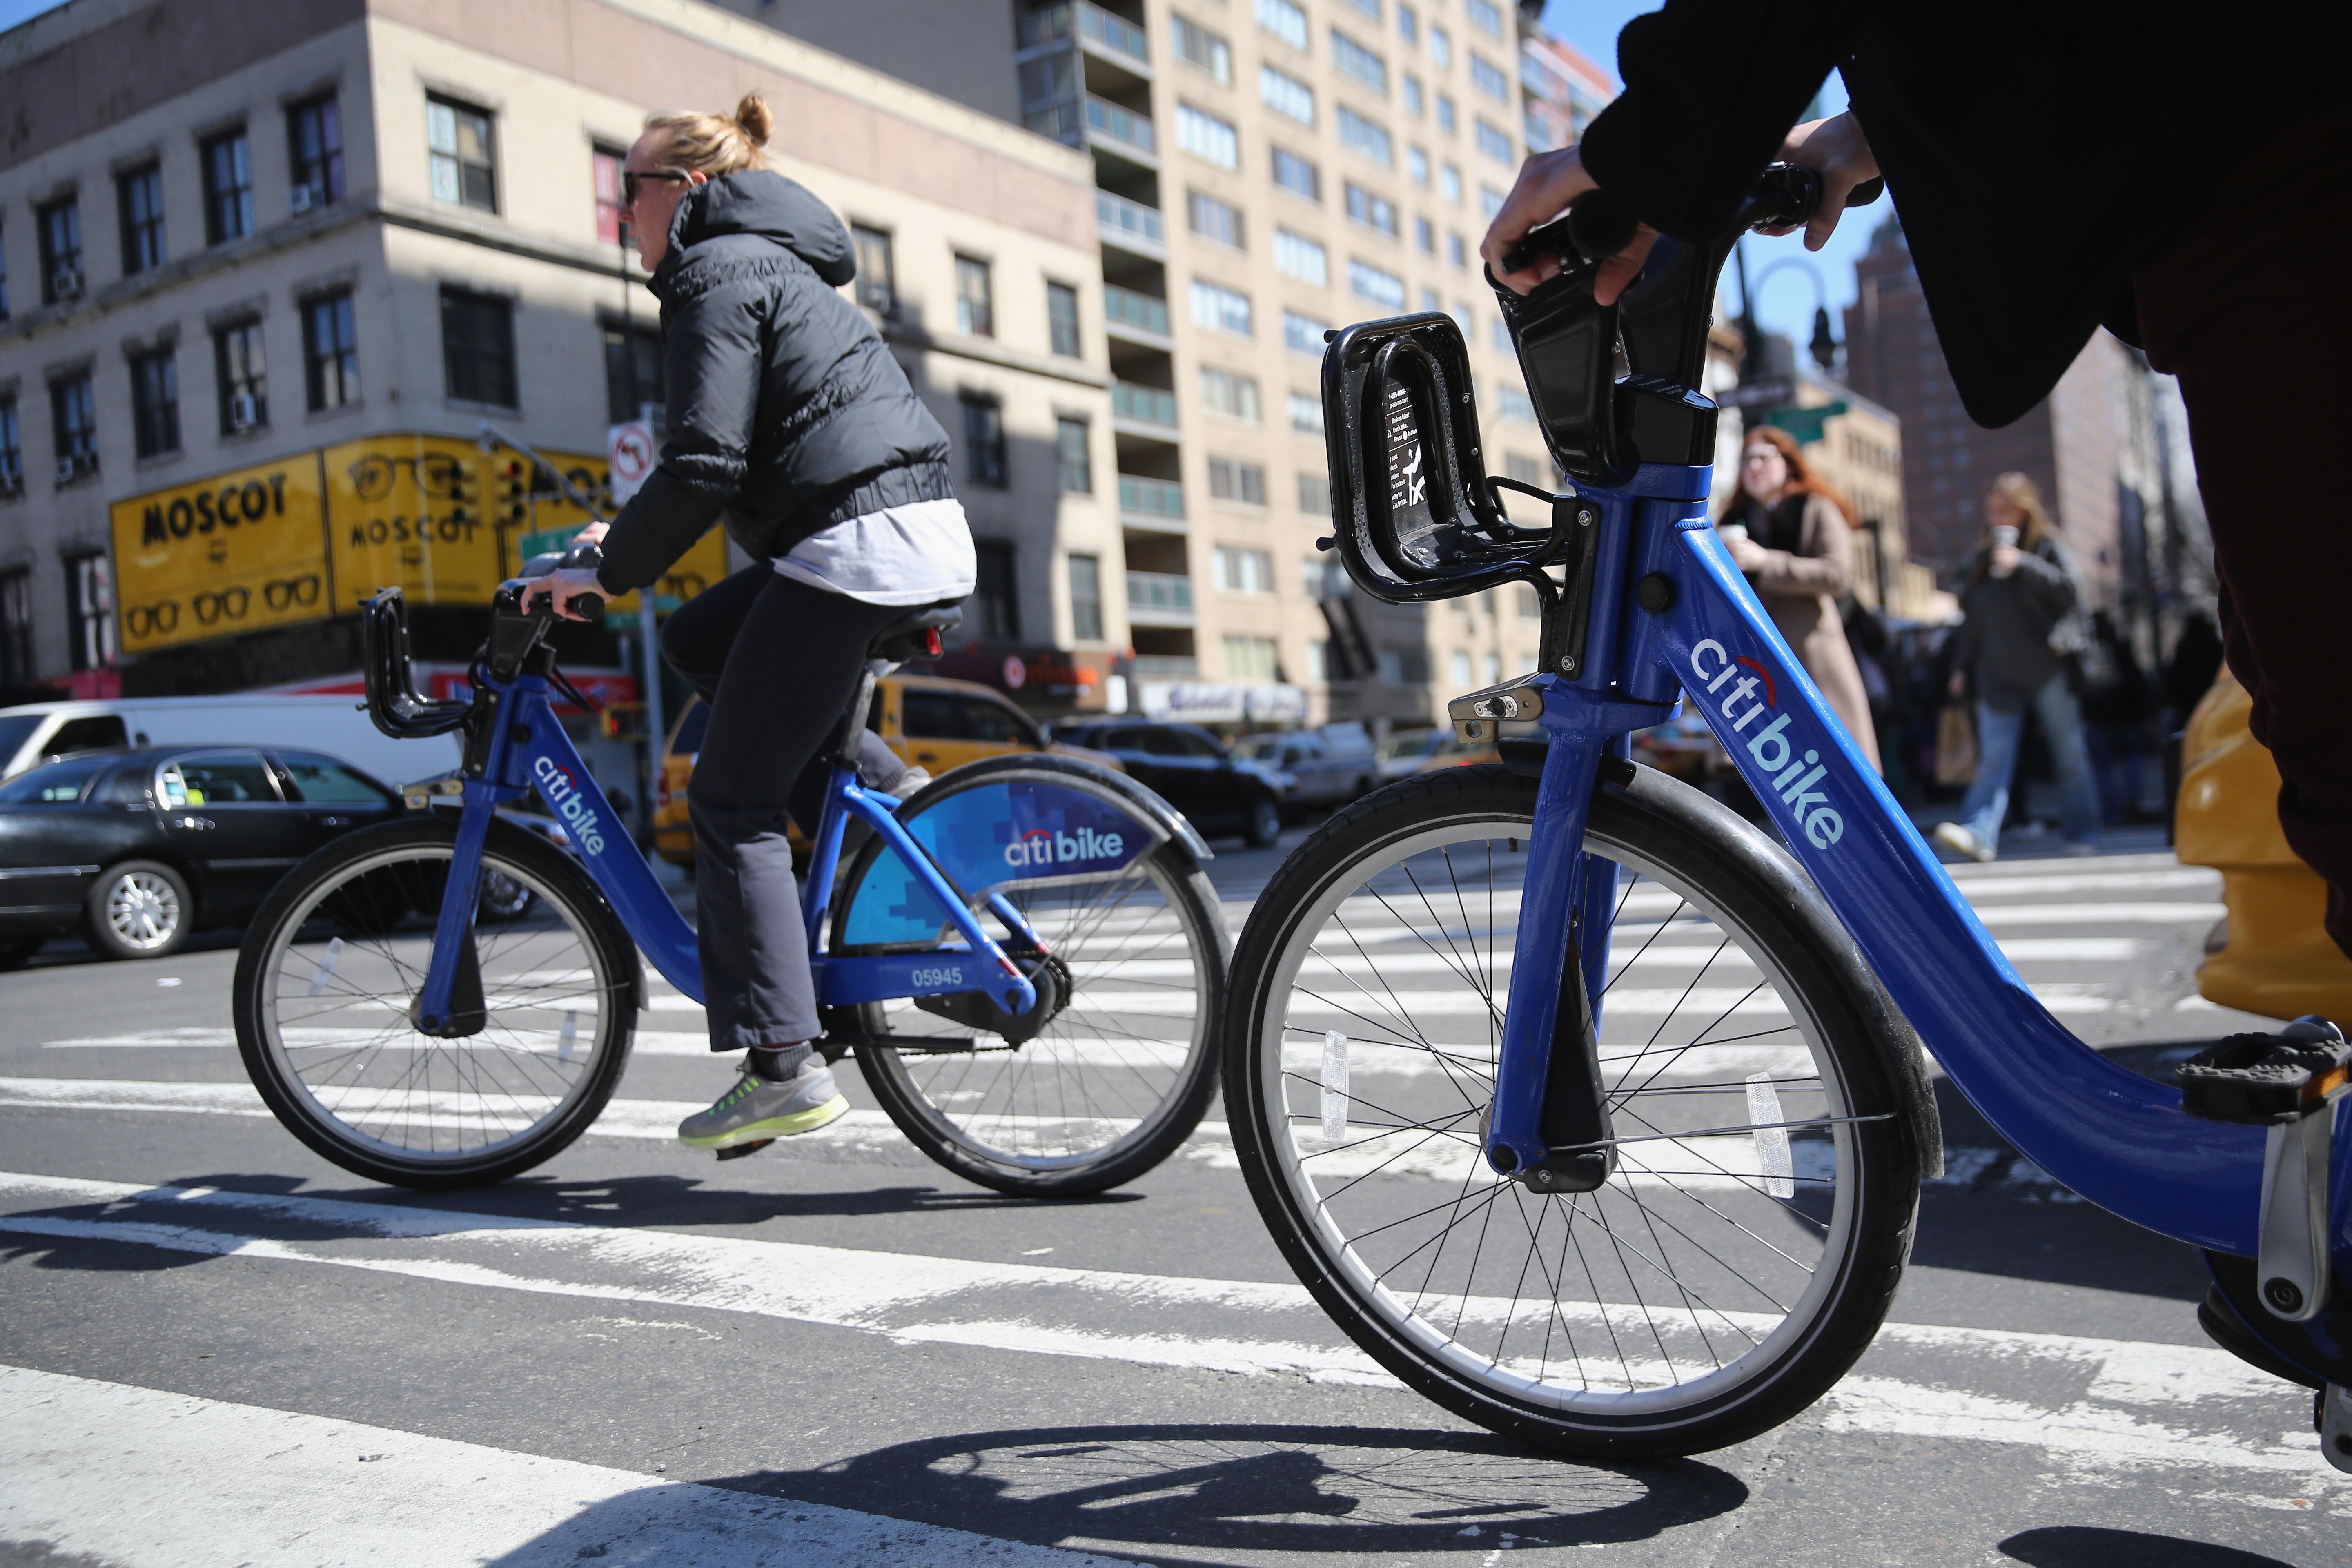 CitiBike safety record